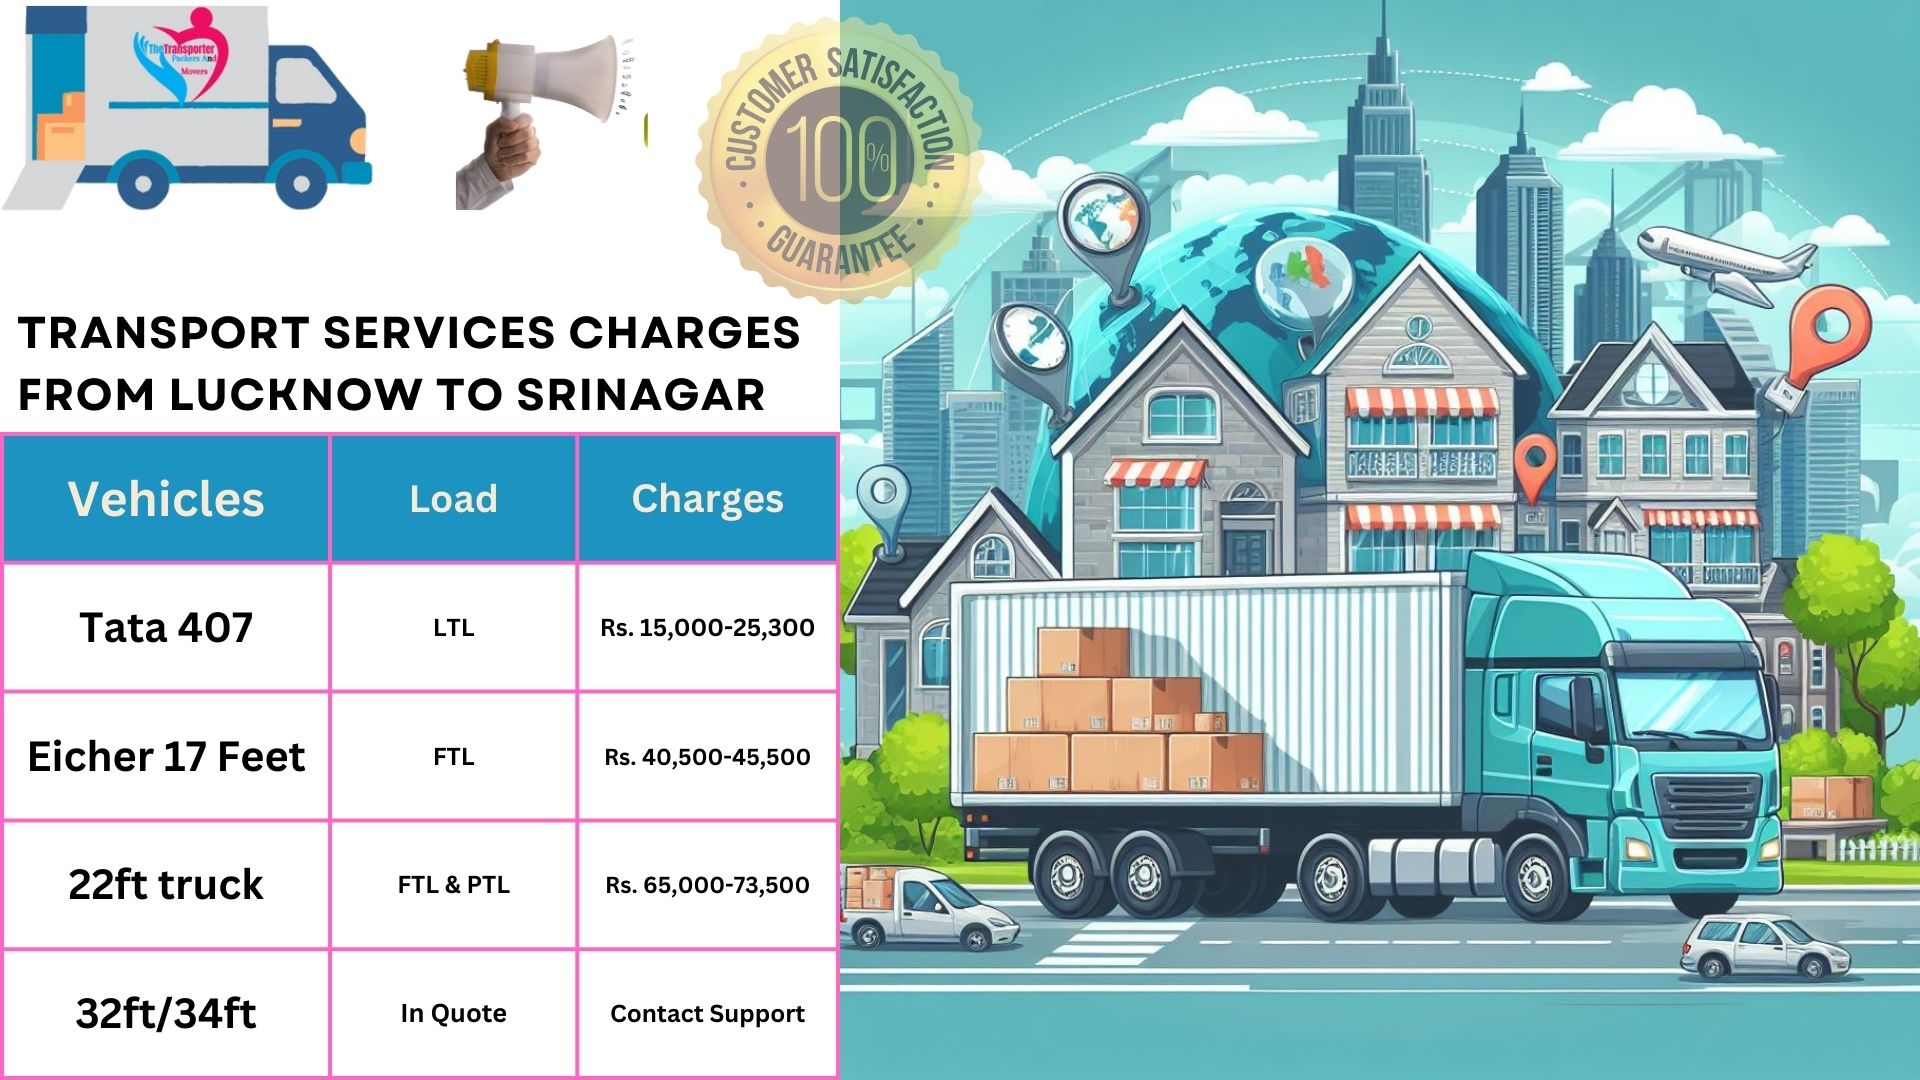 Your household goods shifting from Lucknow to Srinagar